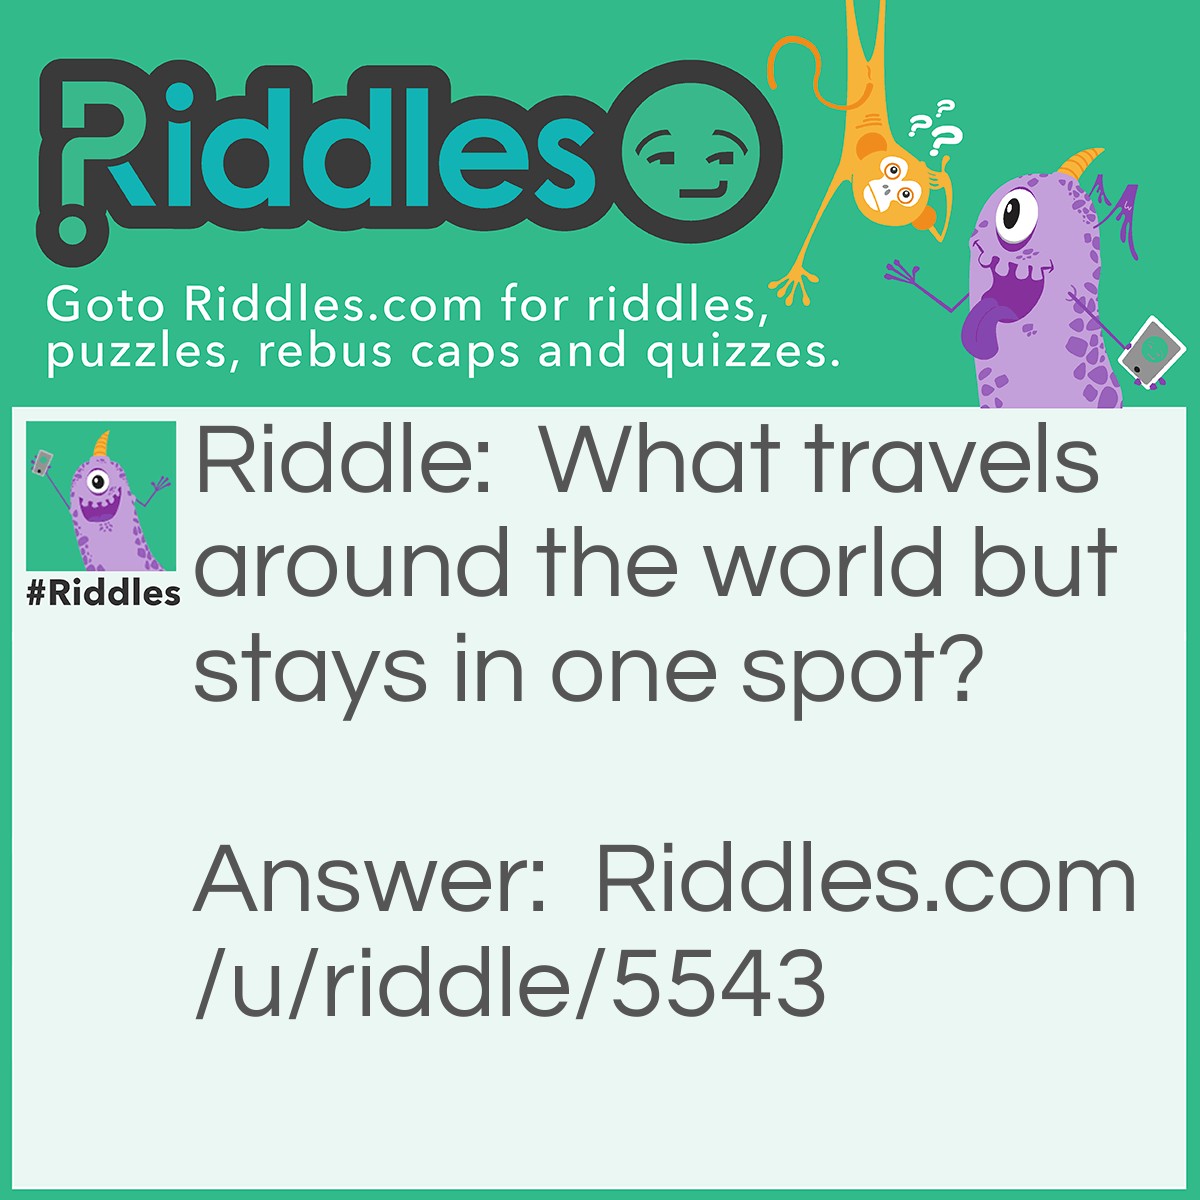 Riddle: What travels around the world but stays in one spot? Answer: Stamp.